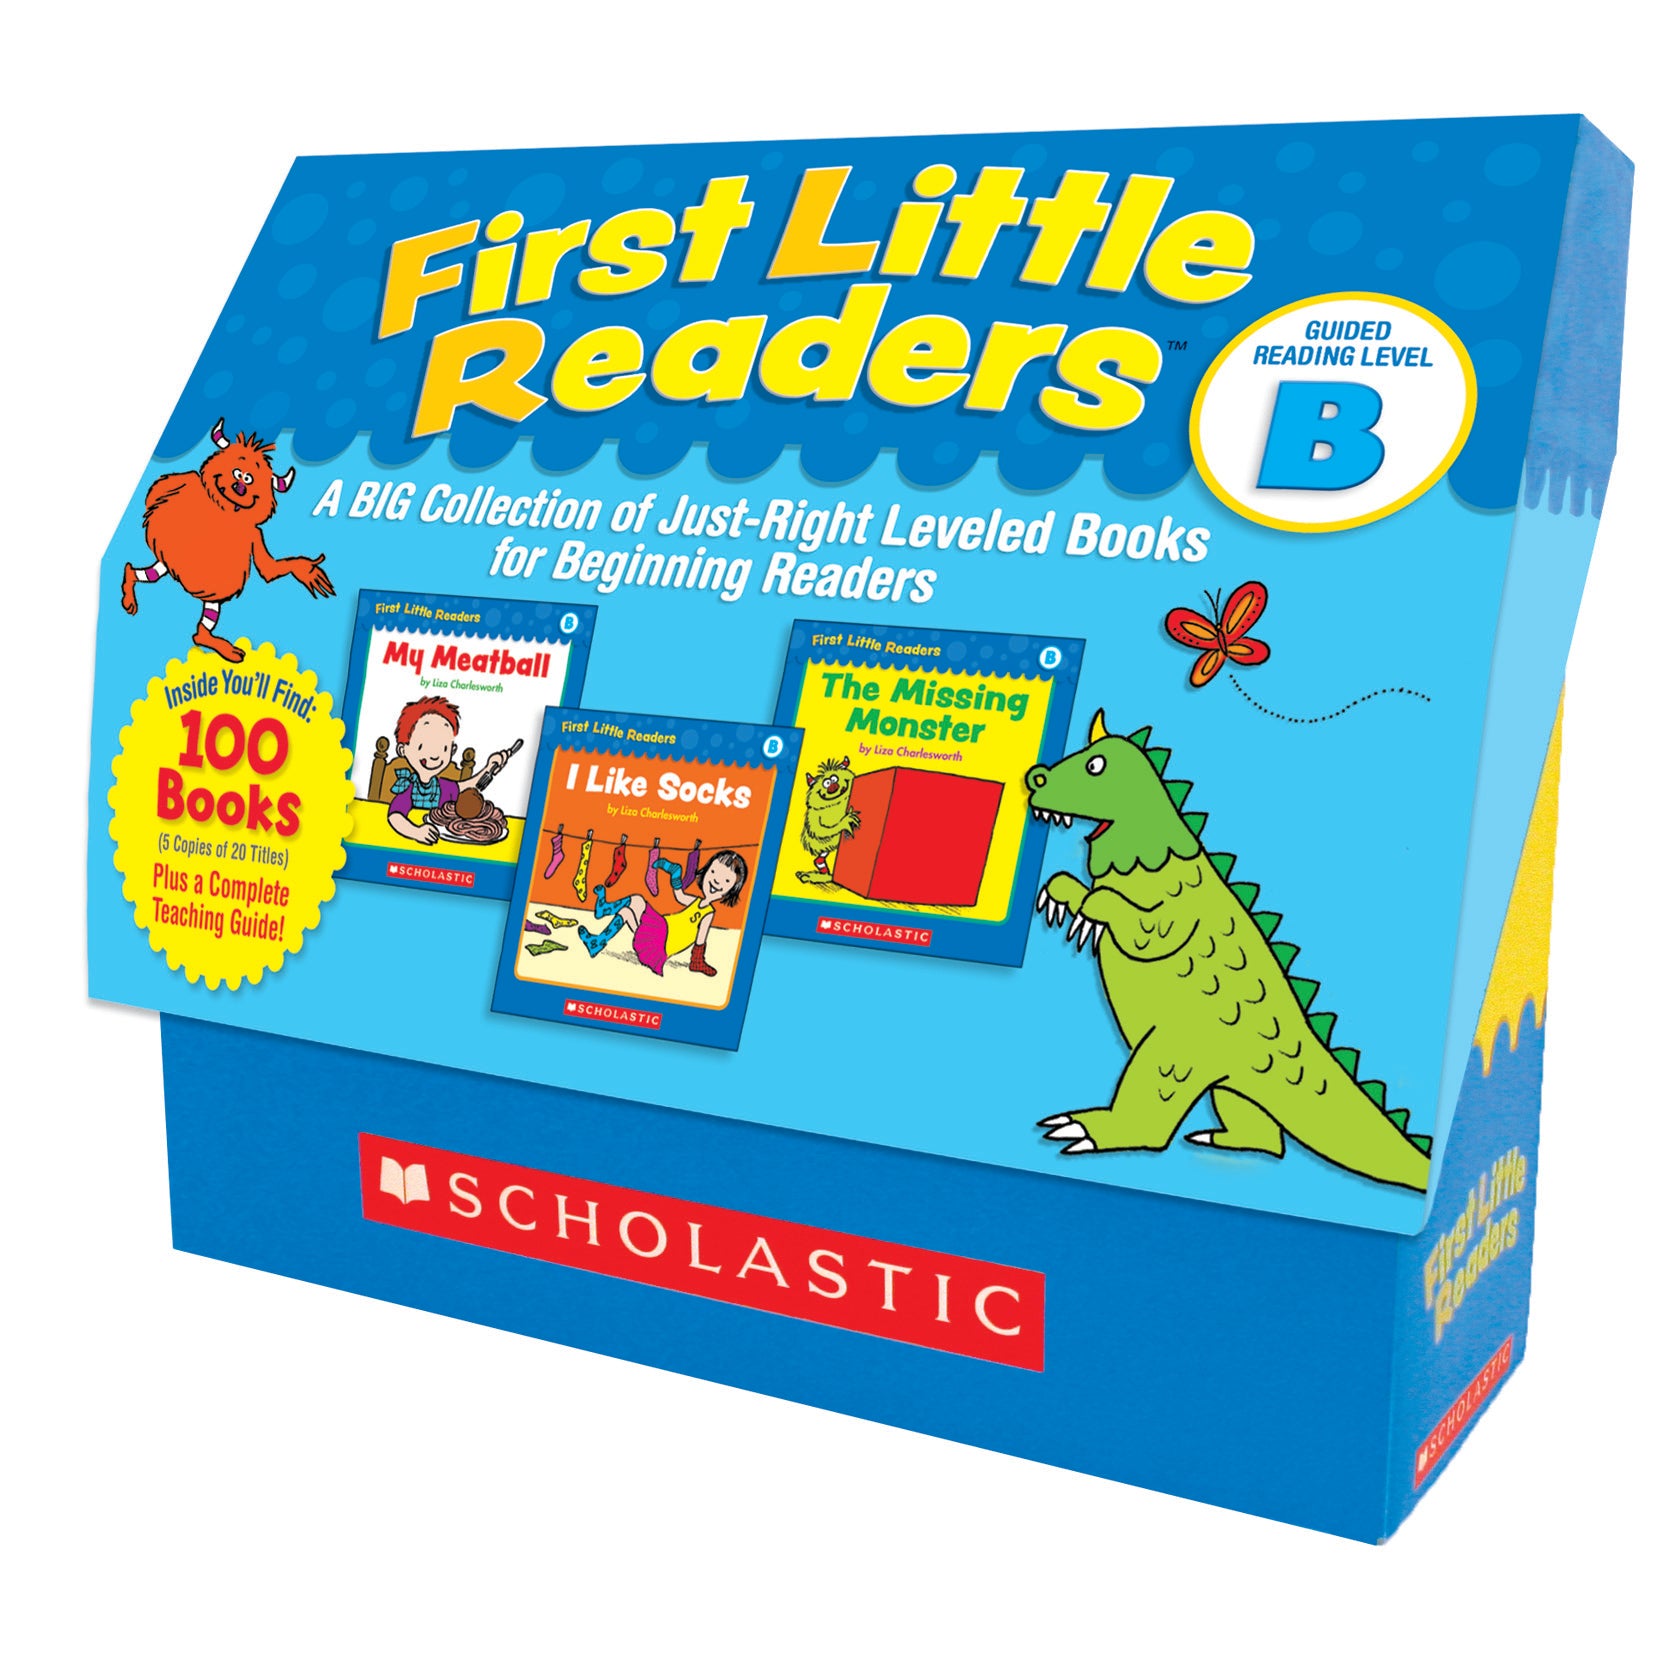 First Little Readers Books, Guided Reading Level B, 5 Copies of 20